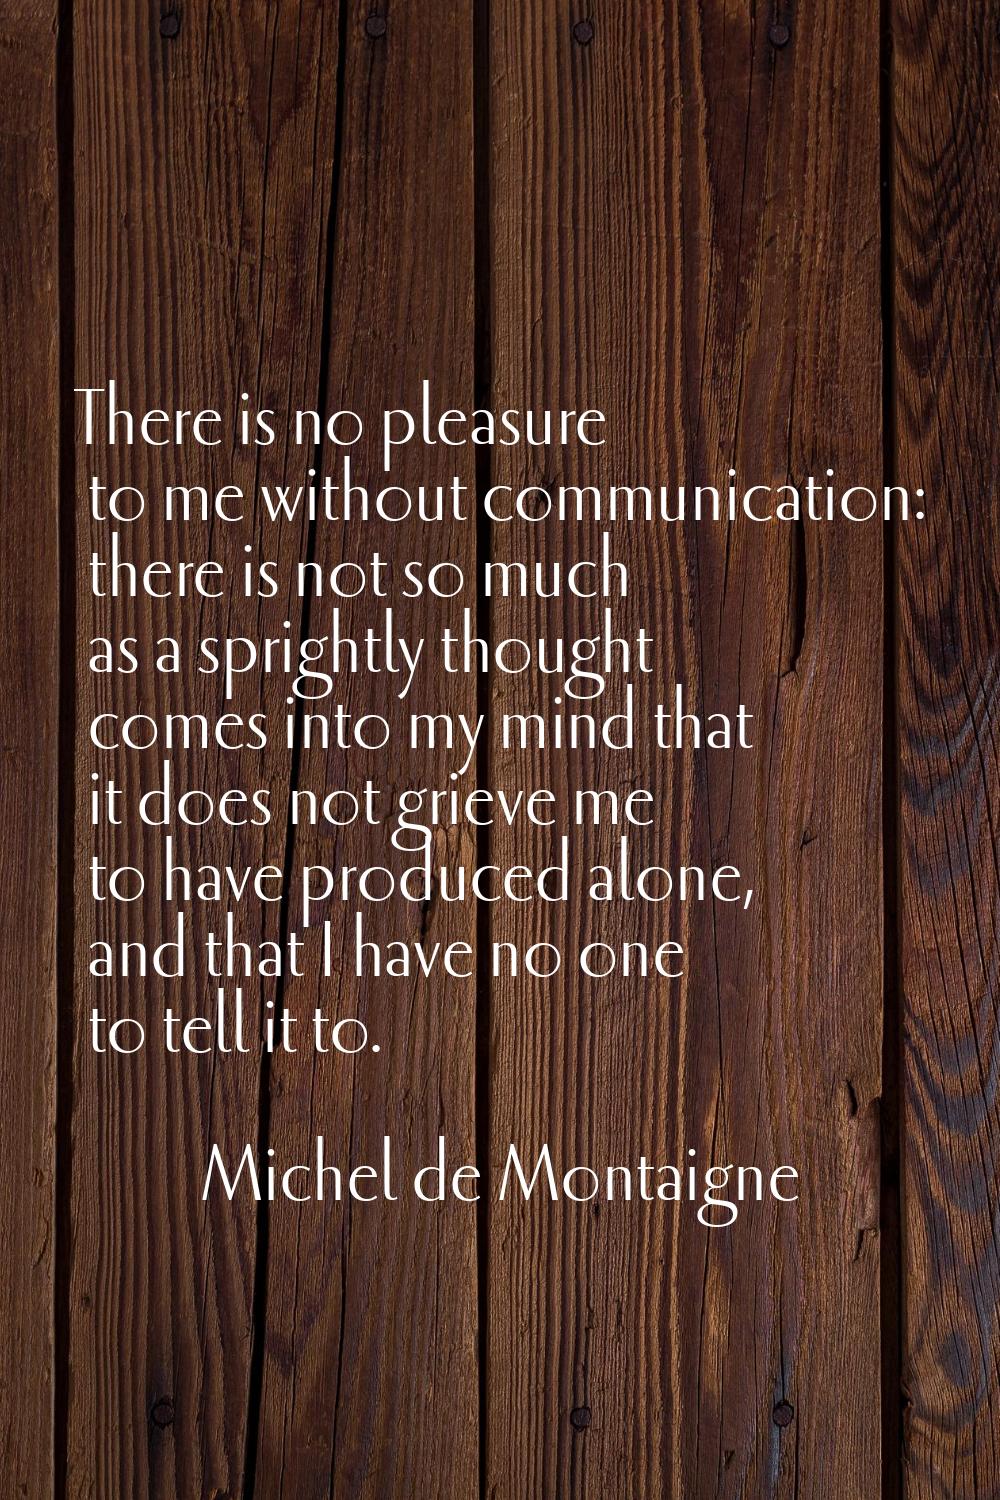 There is no pleasure to me without communication: there is not so much as a sprightly thought comes